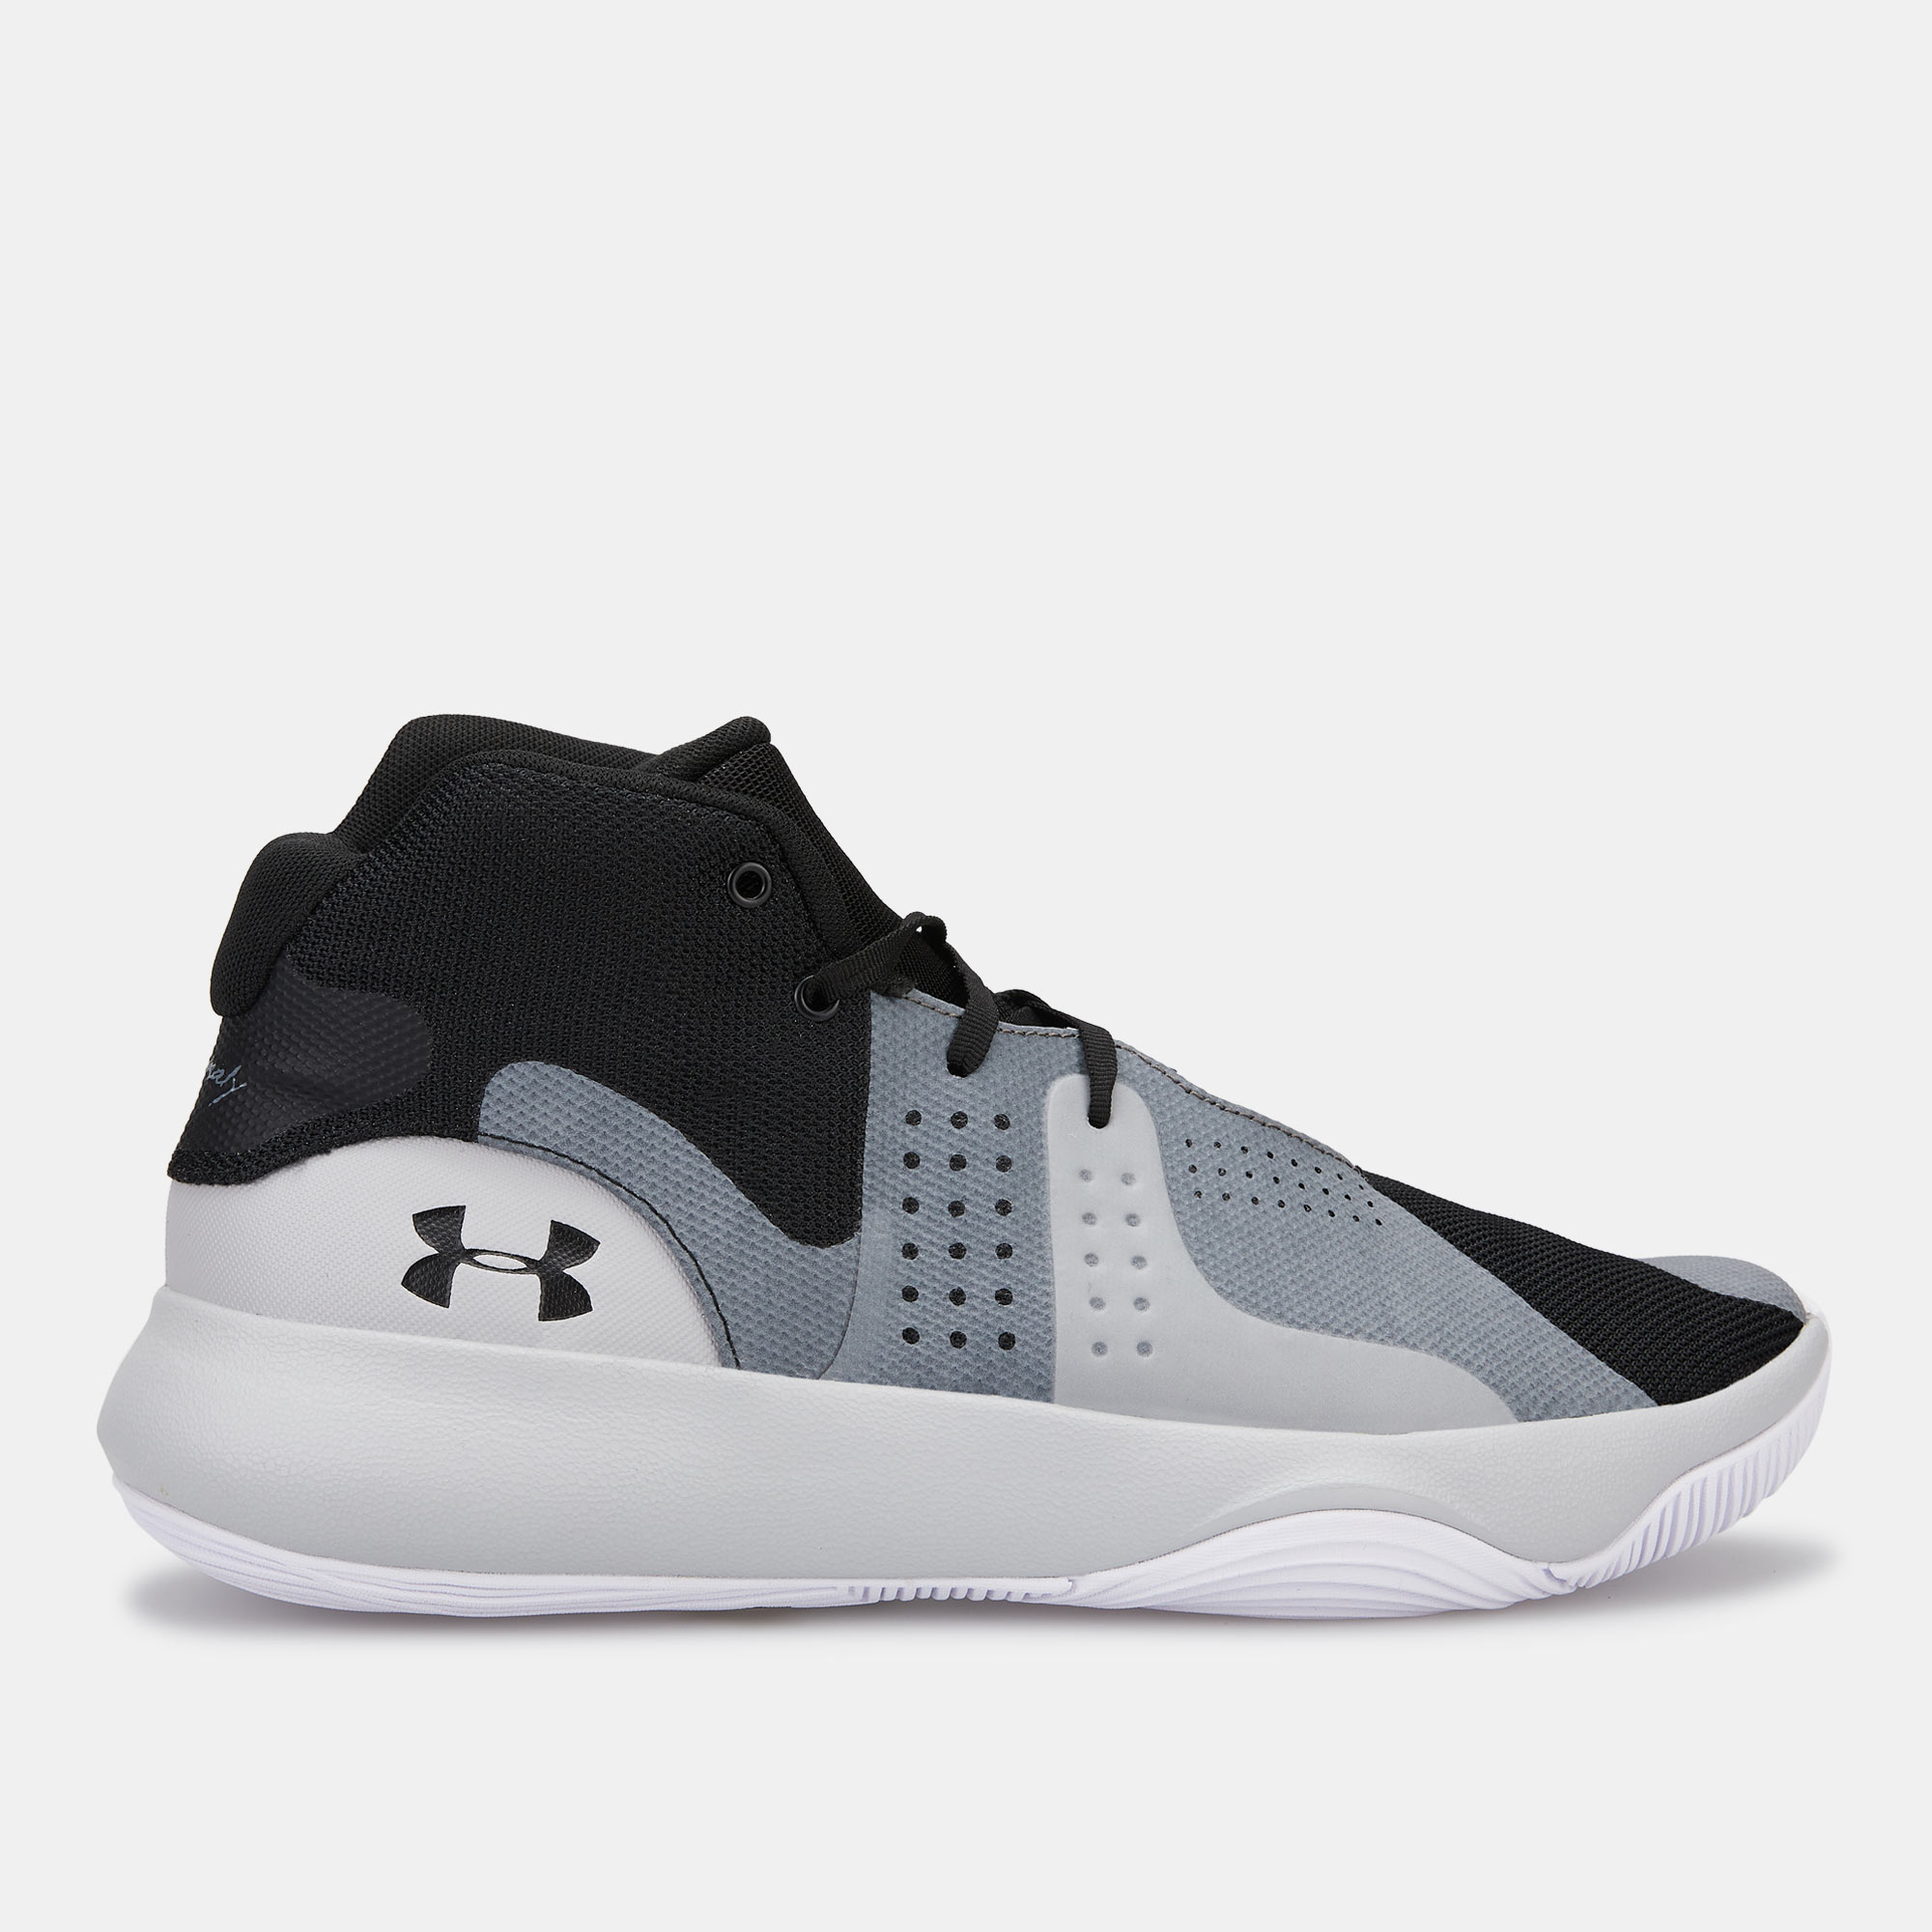 Under Armour Men's Anomaly Basketball Shoe | Sneakers | Shoes | Sports ...